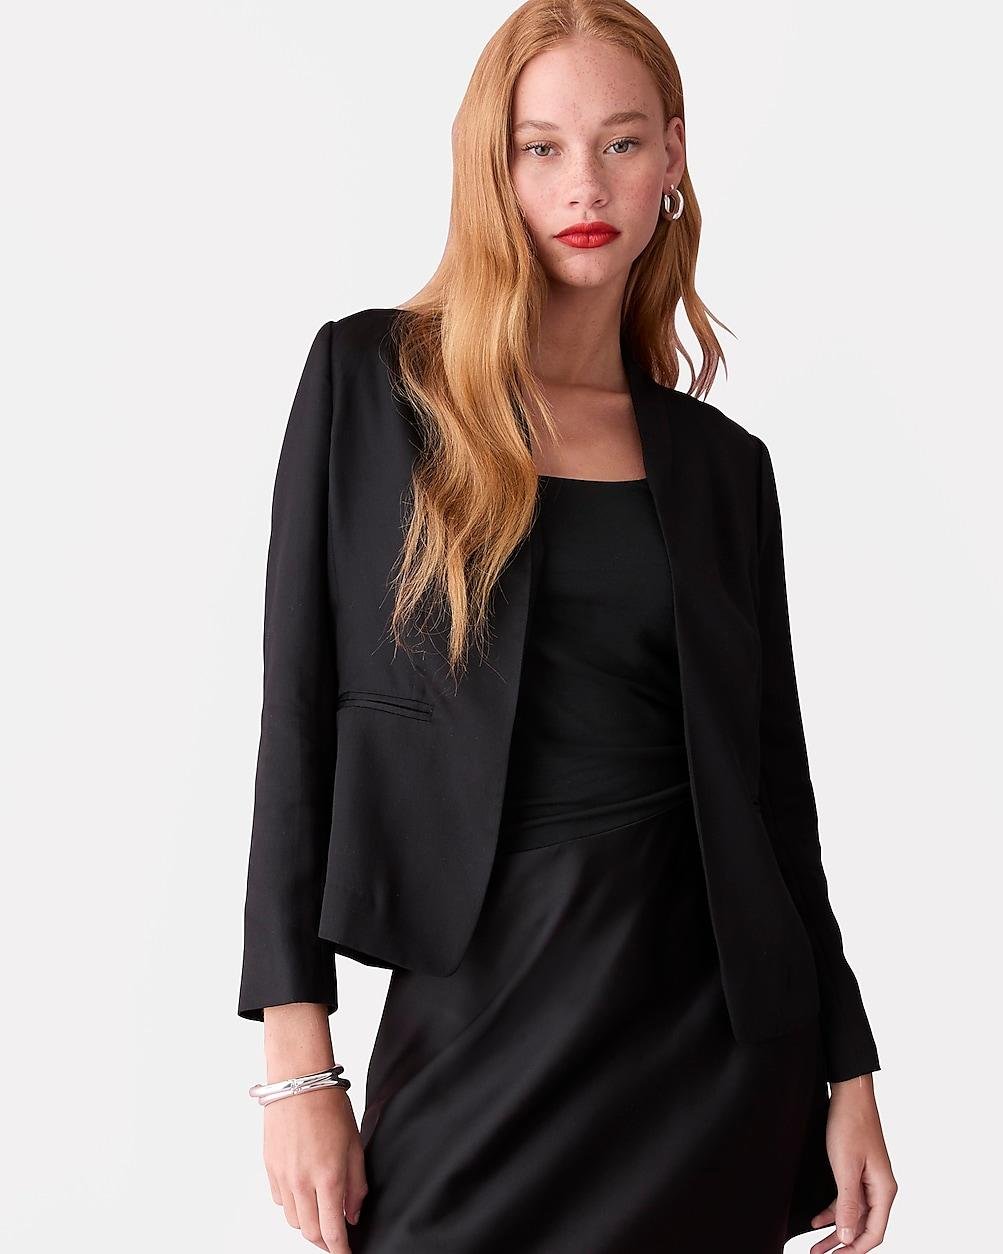 Going-out blazer in Gramercy twill by J.CREW